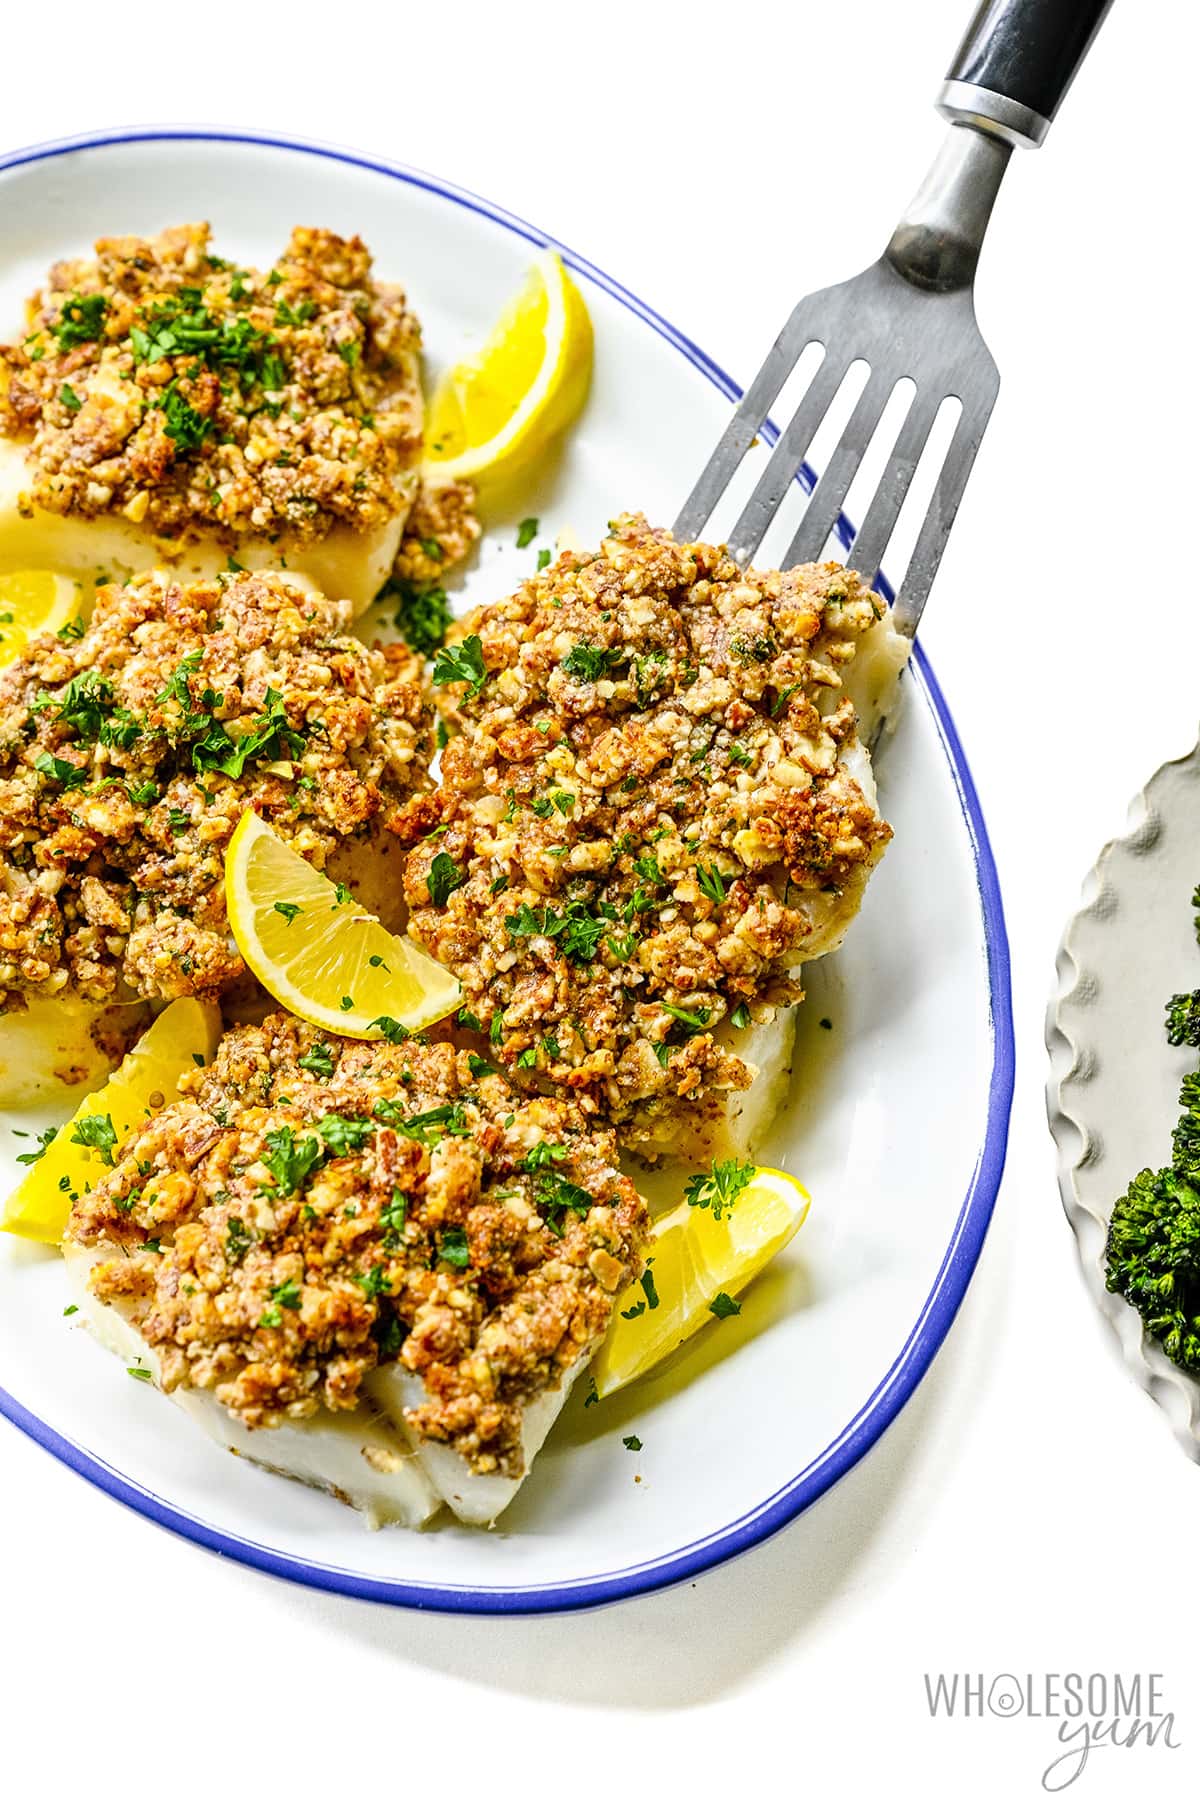 Baked haddock recipe on a plate with almond crust, fish spatula, and lemon wedges.